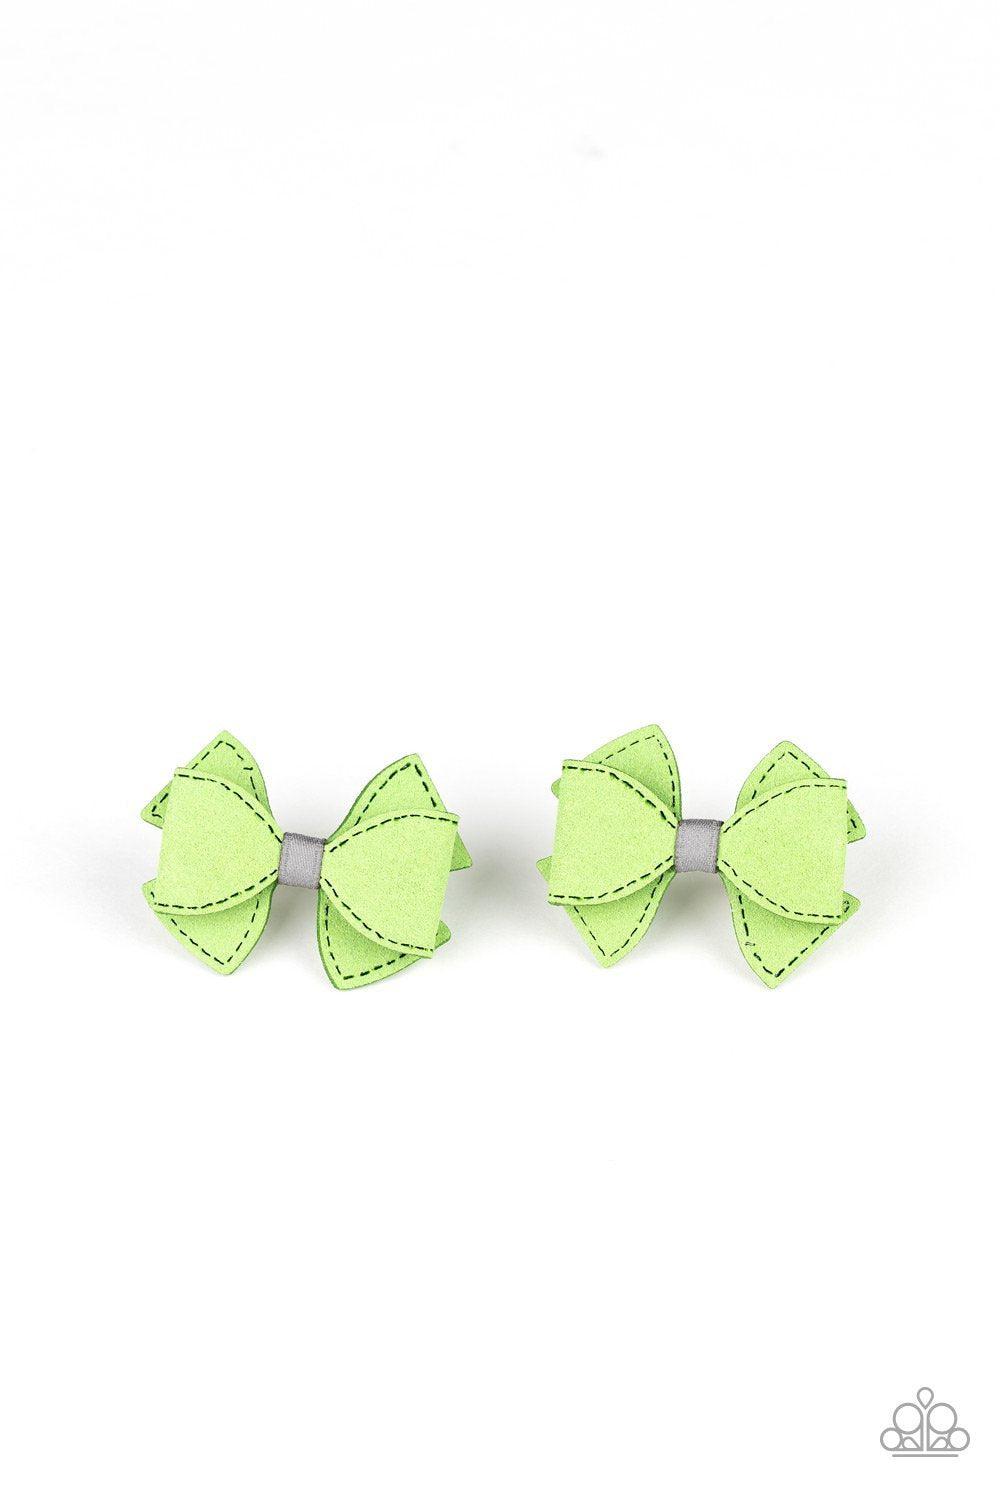 Boots and Bows Green Suede Hair Clips - Paparazzi Accessories-CarasShop.com - $5 Jewelry by Cara Jewels